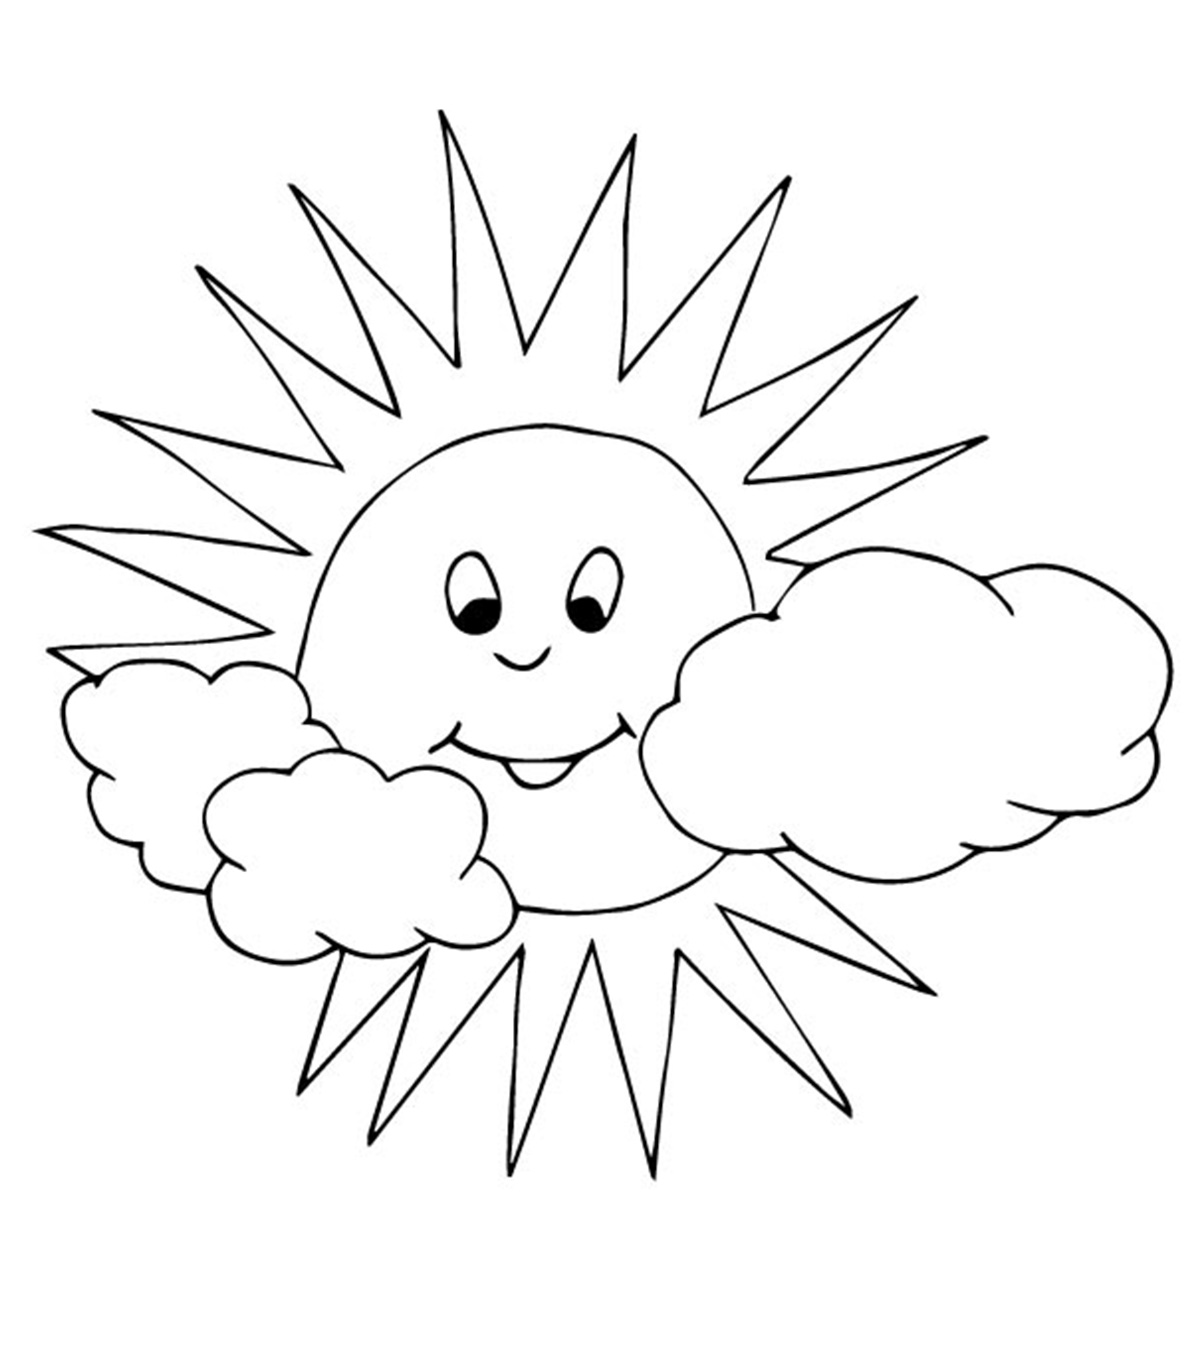 25 Interesting Sun Coloring Pages For Your Little Ones_image